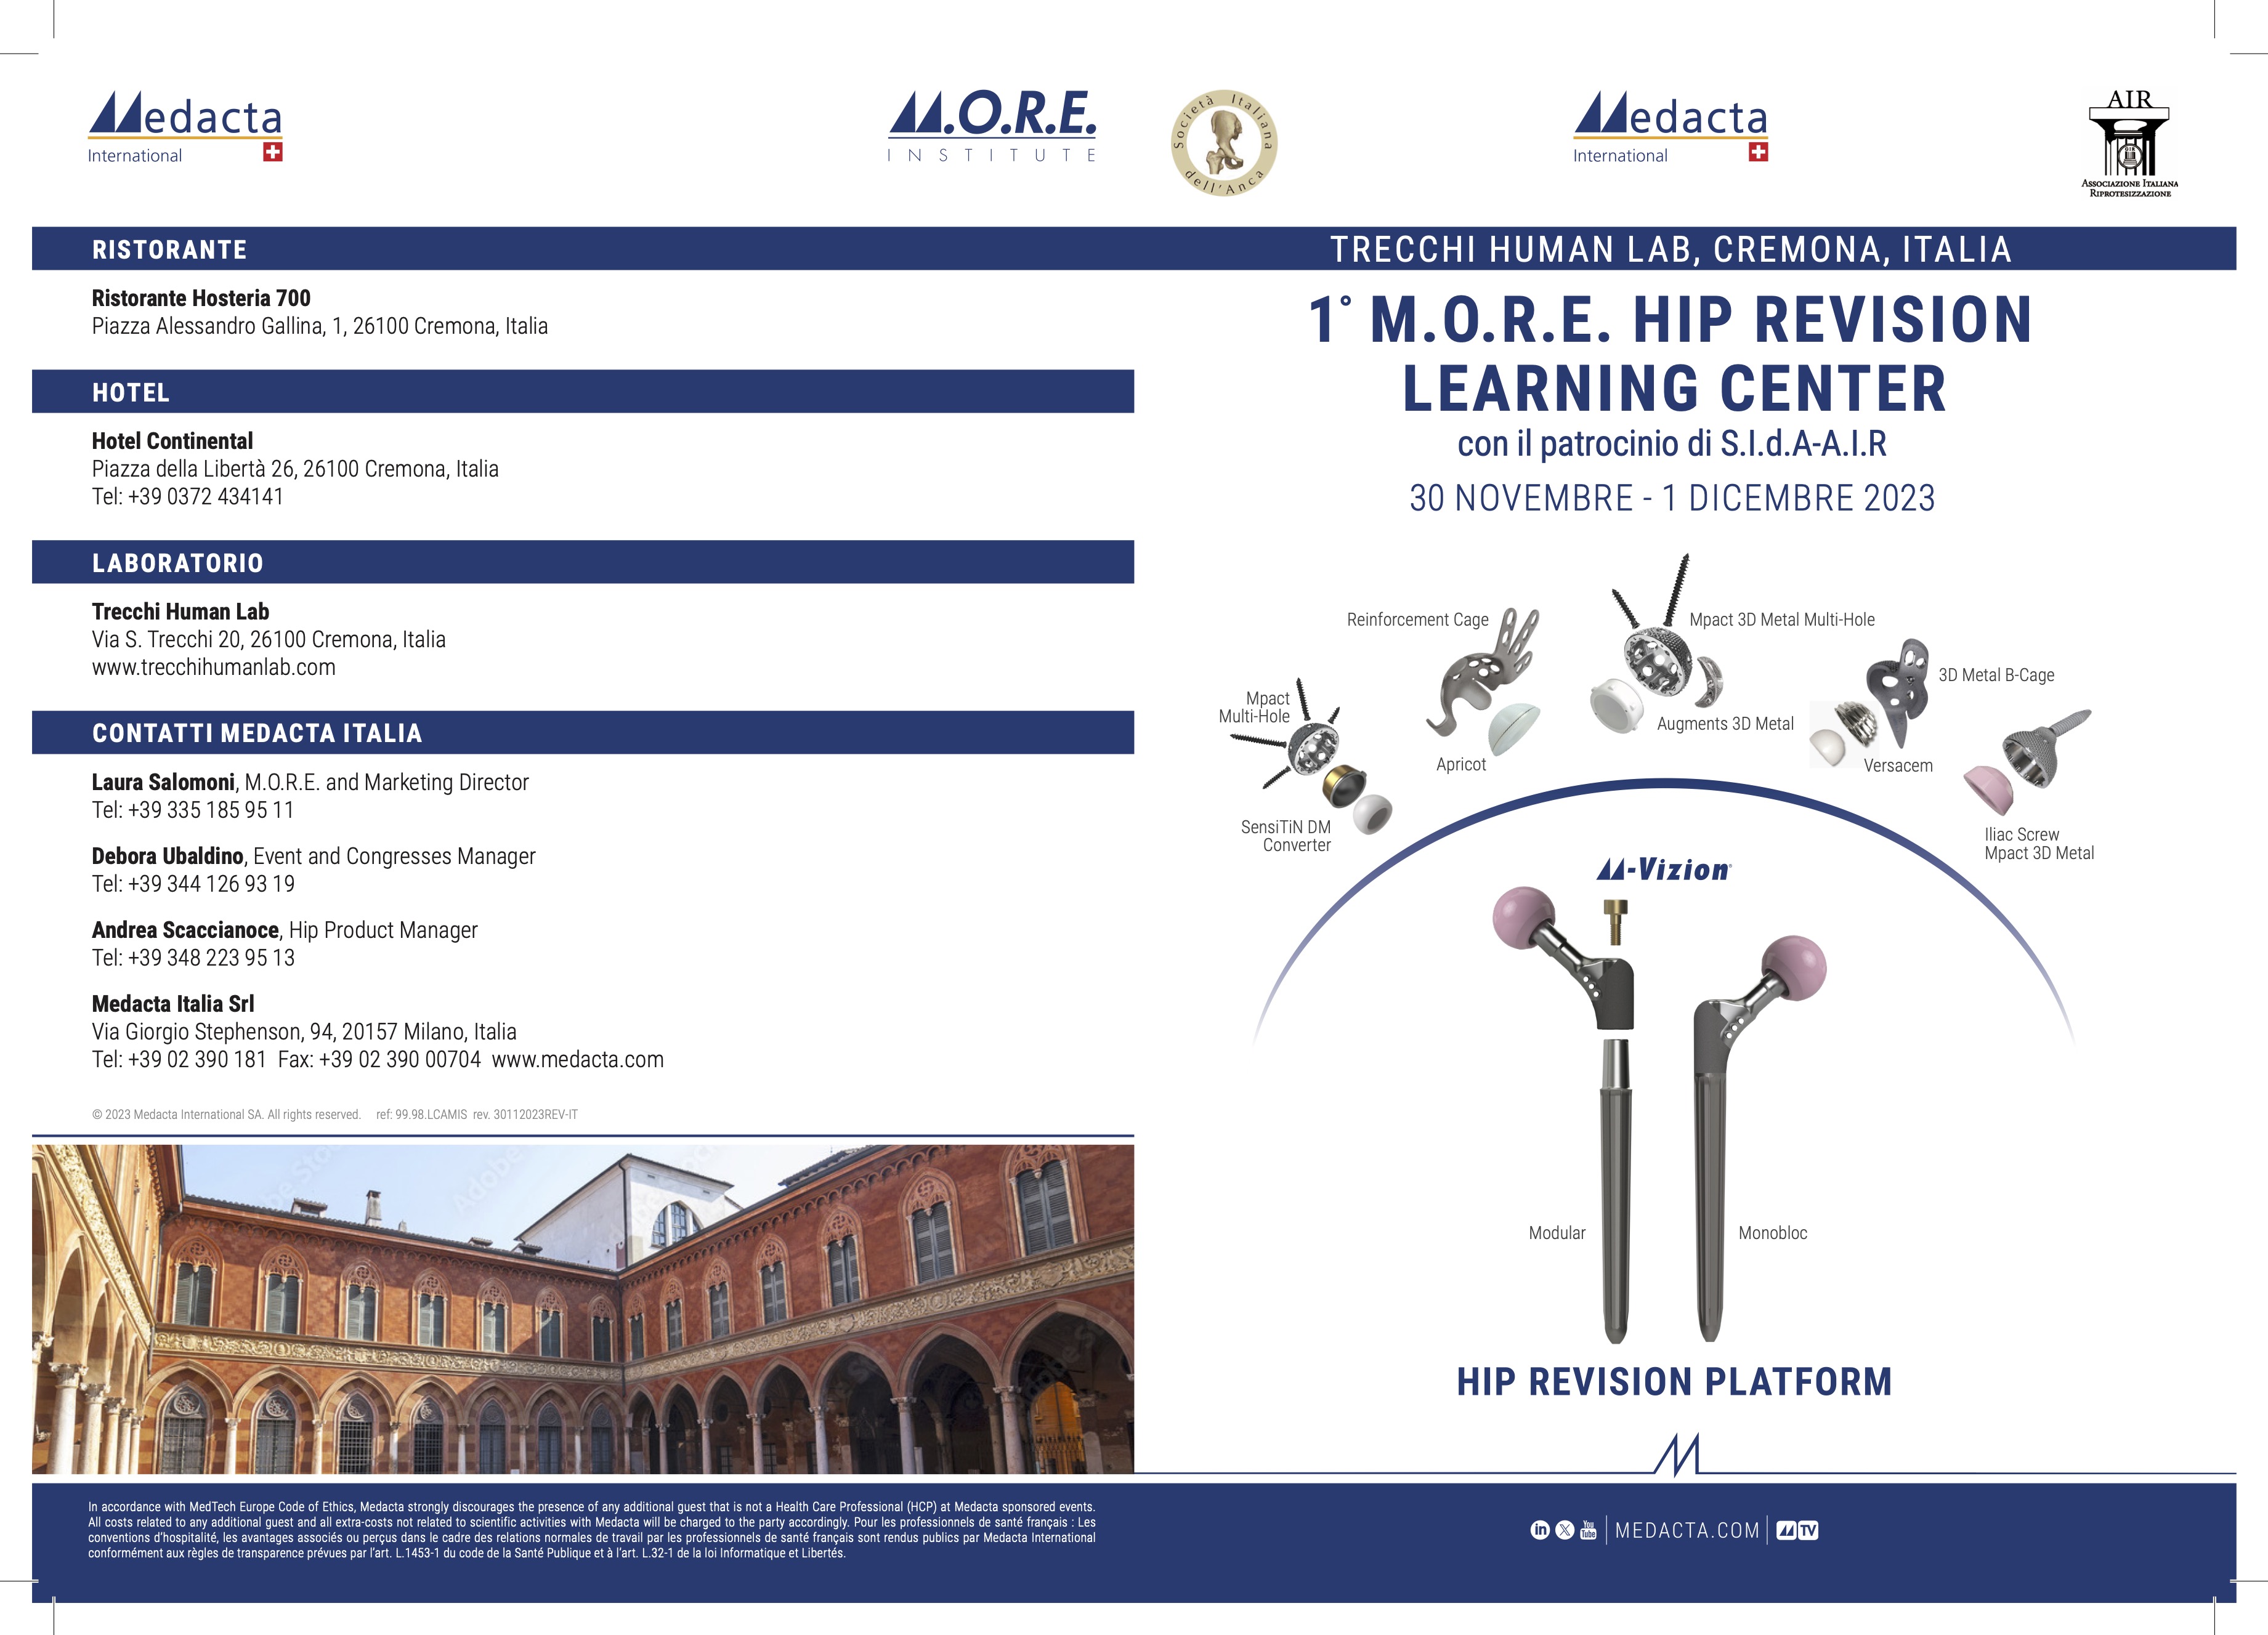 1° M.O.R.E. HIP REVISION LEARNING CENTER